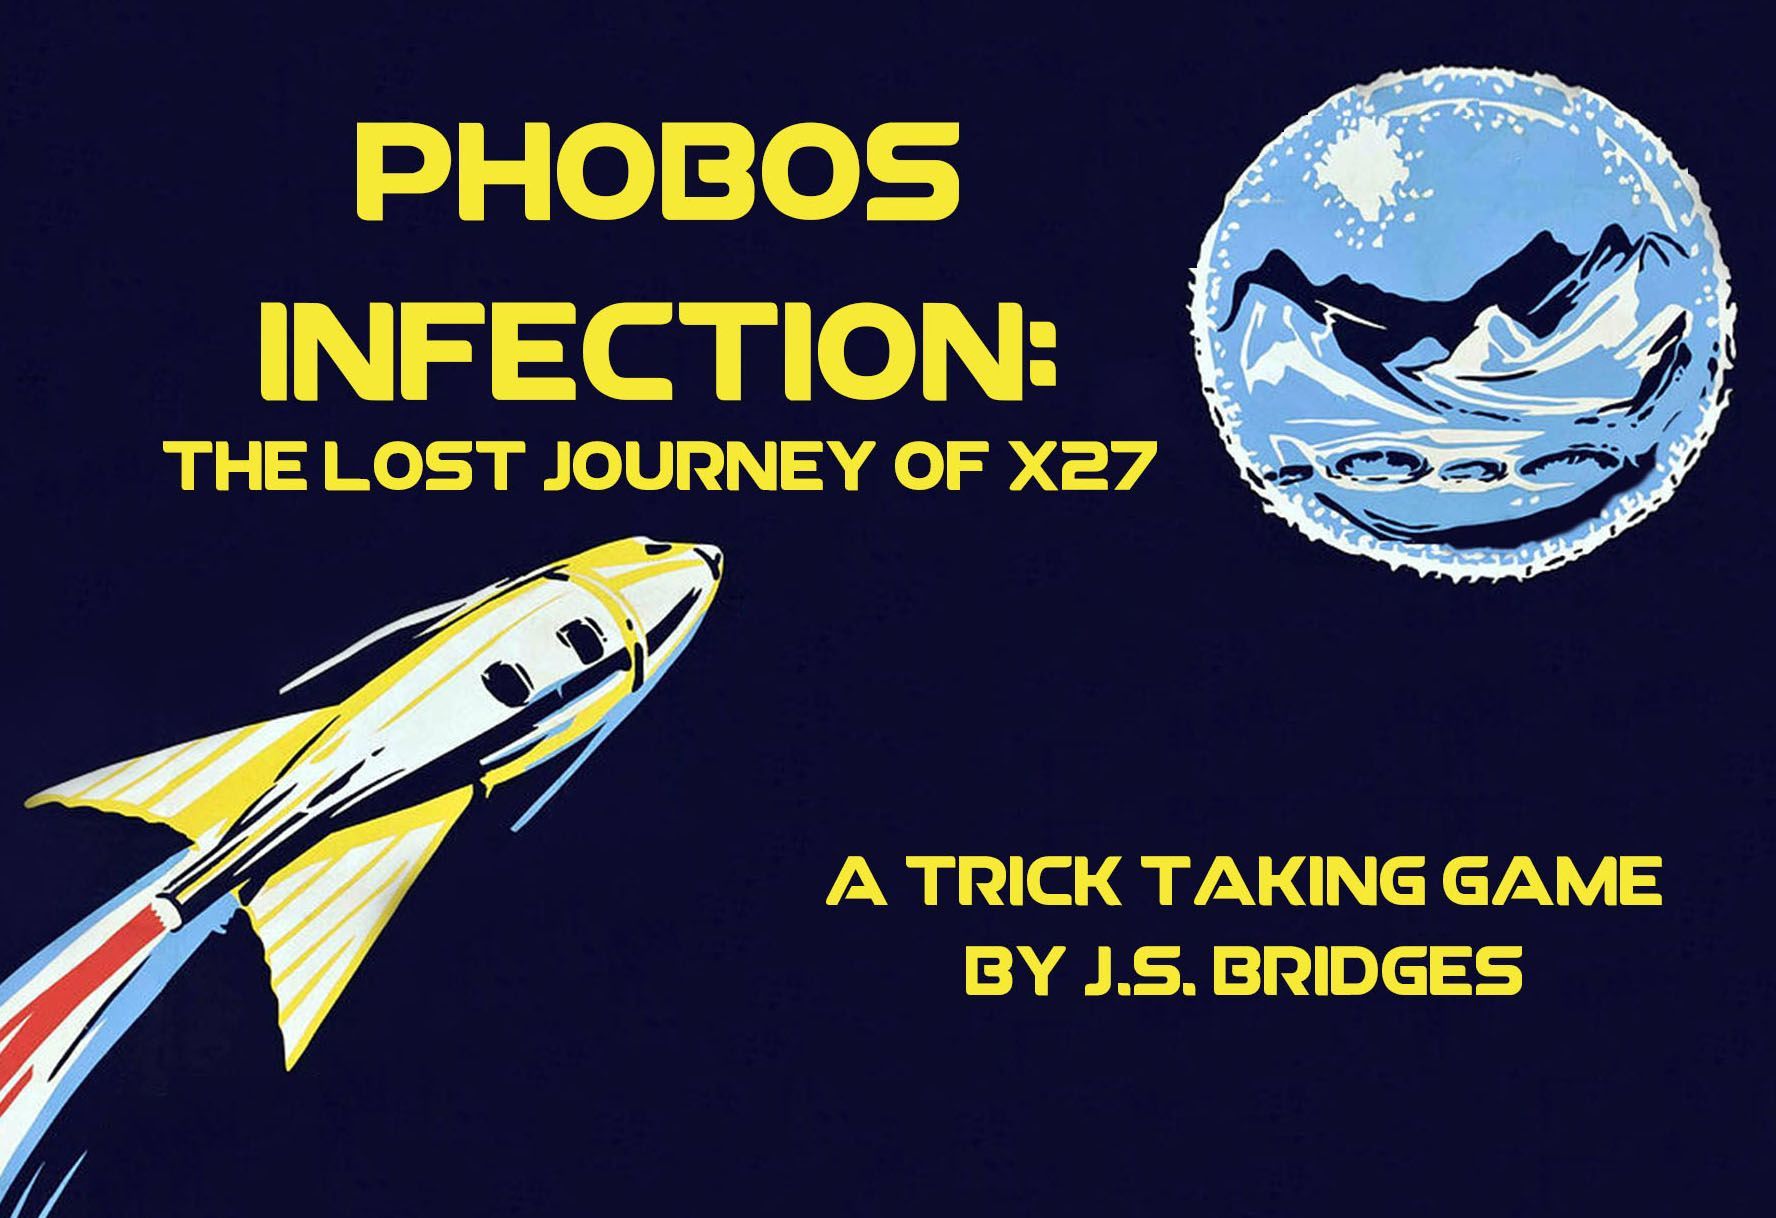 Phobos Infection: The Lost Journey of X27